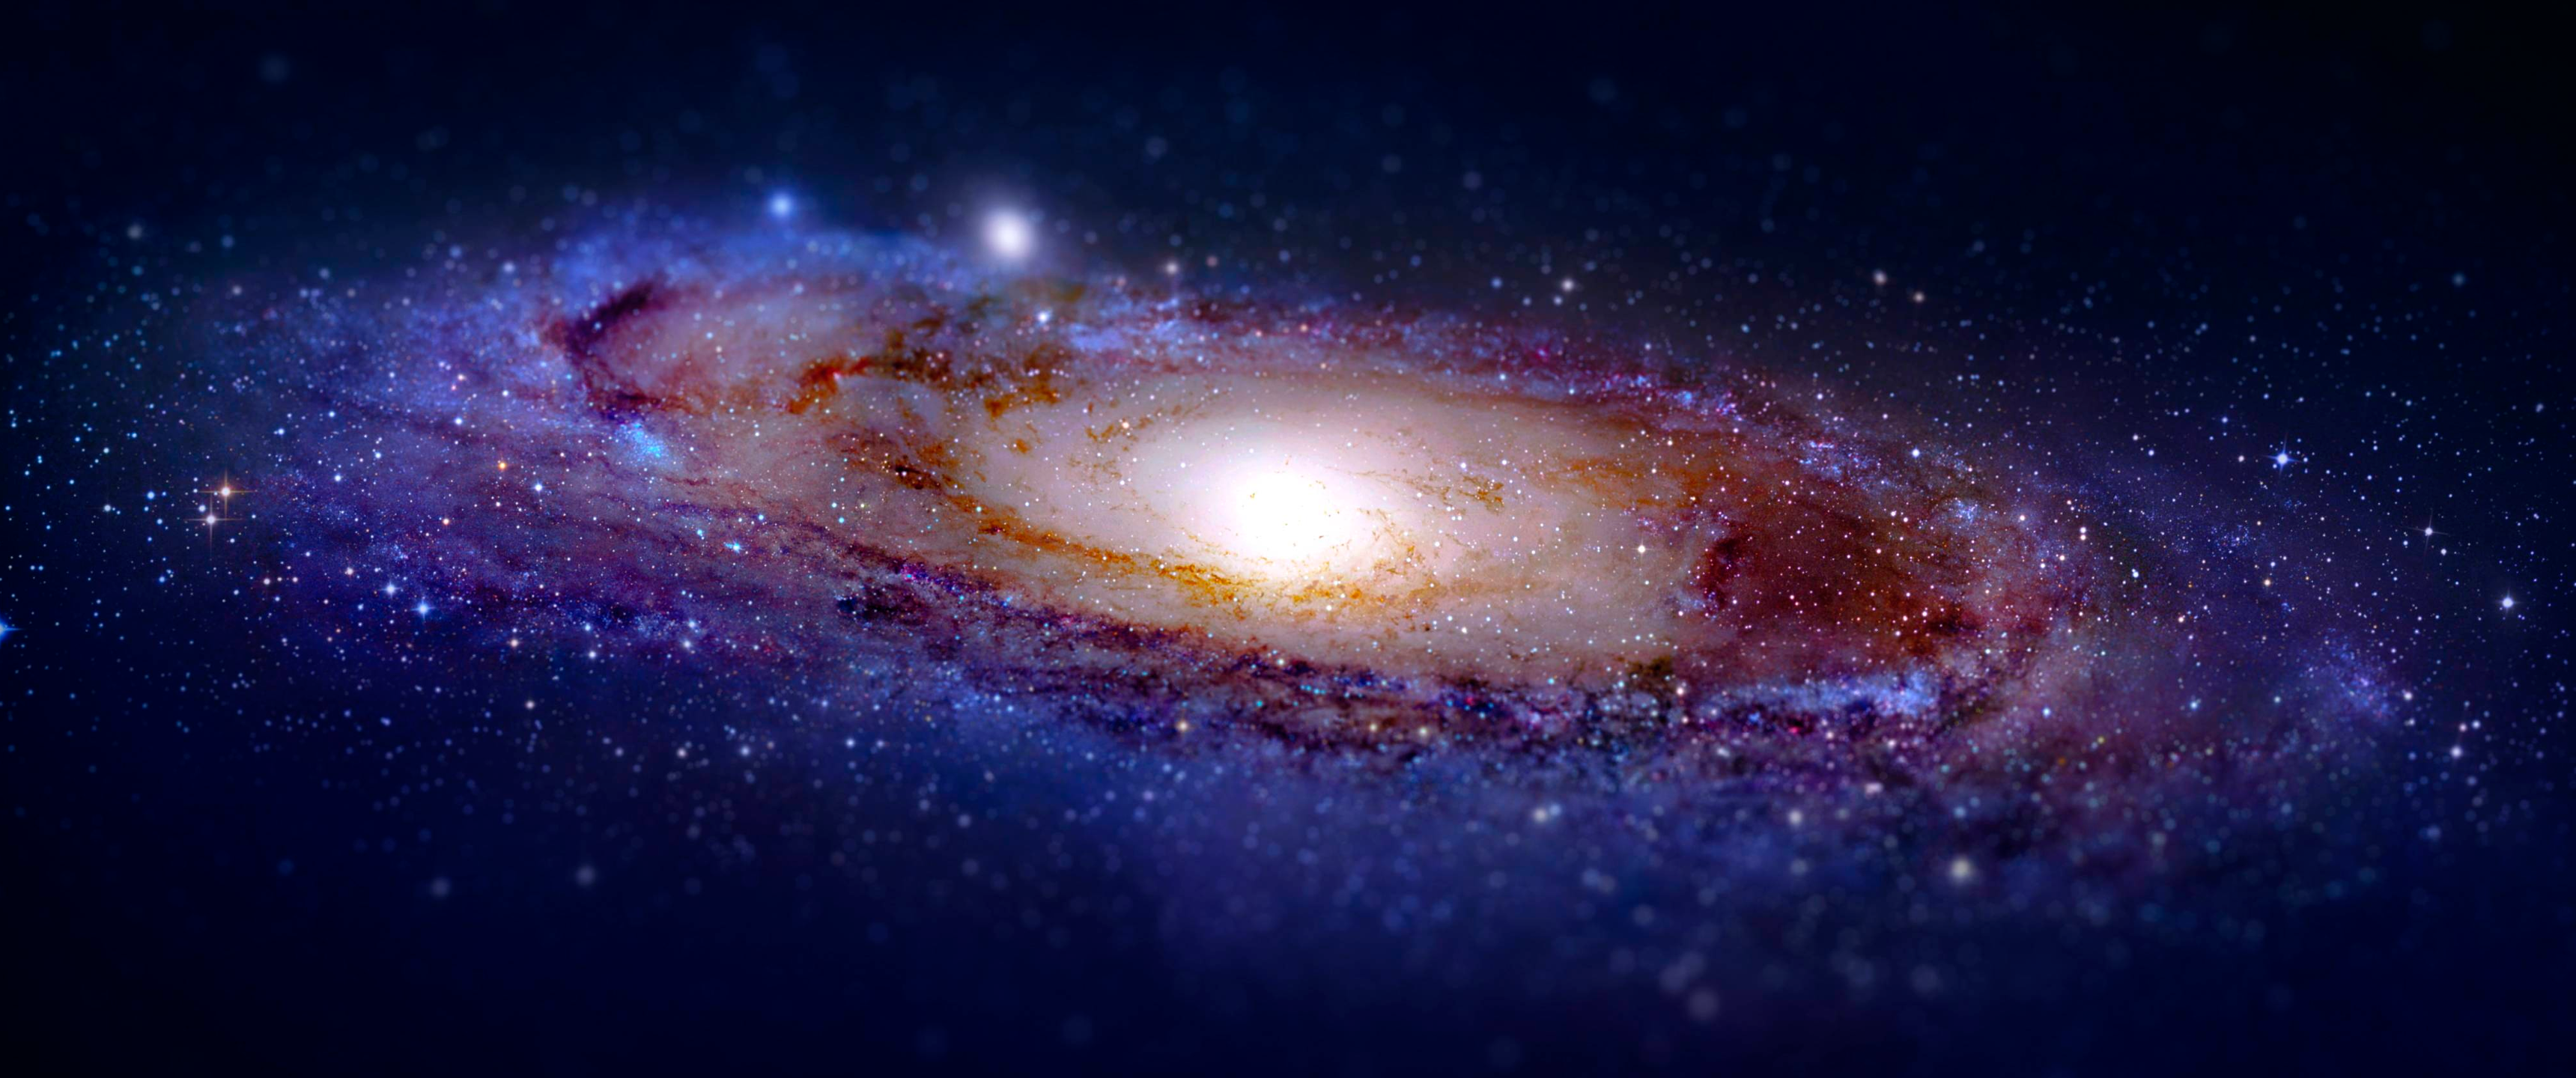 andromeda wallpaper,galaxy,spiral galaxy,outer space,nature,sky